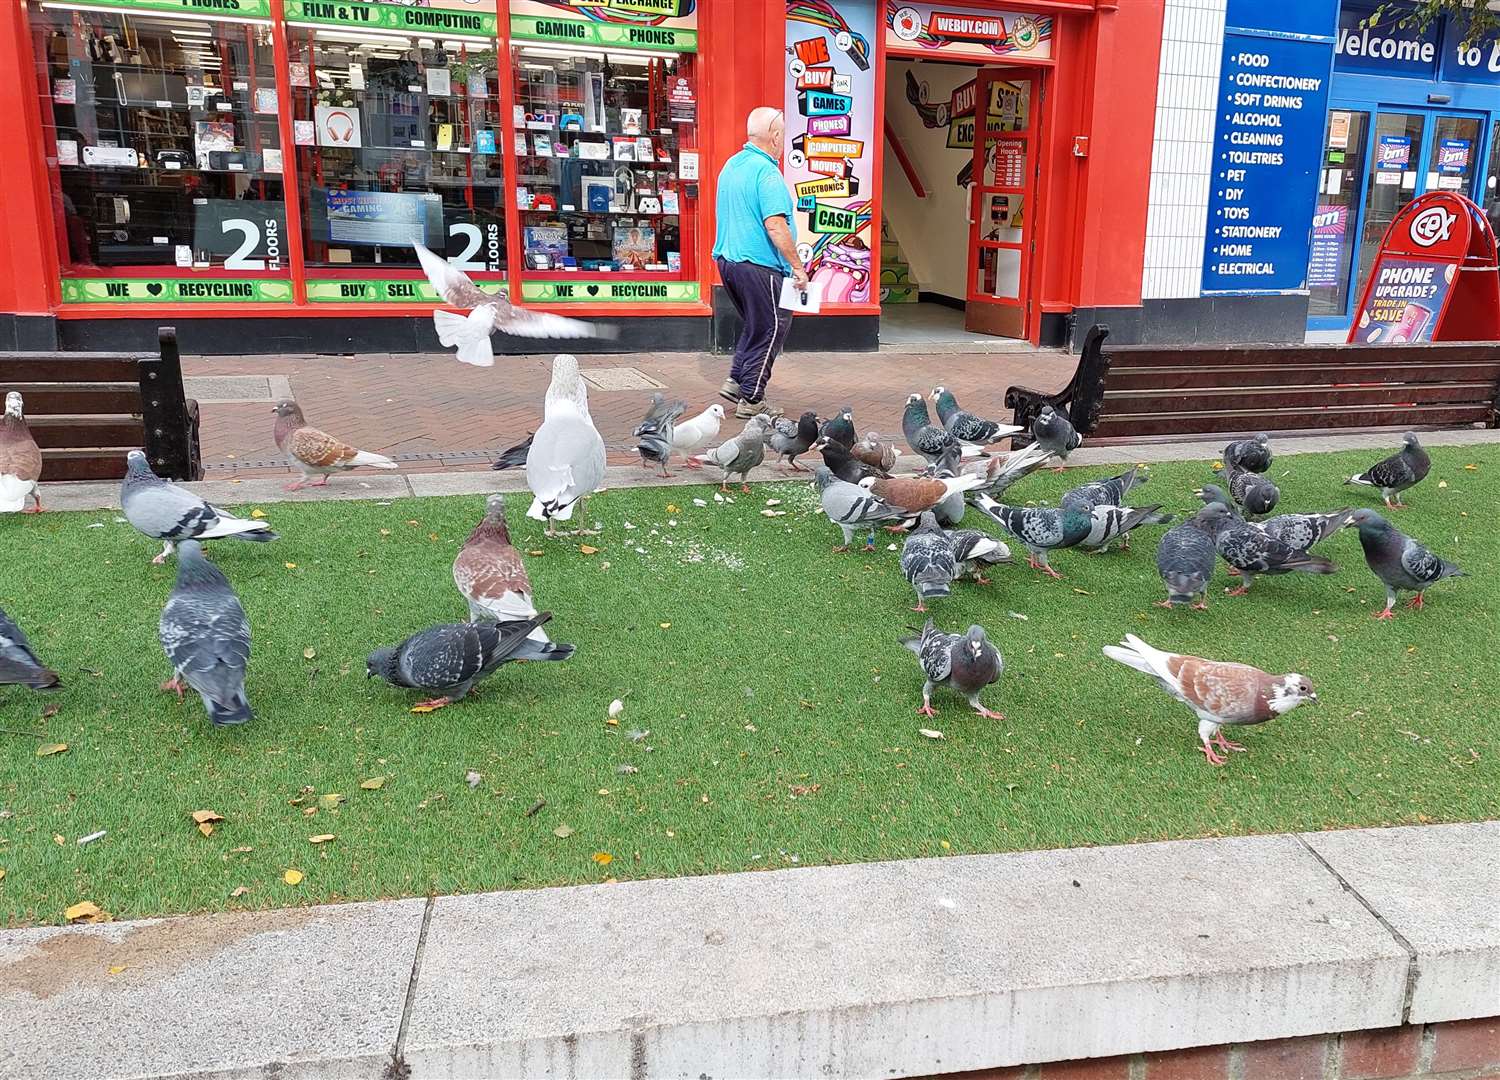 Pigeons and seagulls often gather in the high street where shoppers feed them